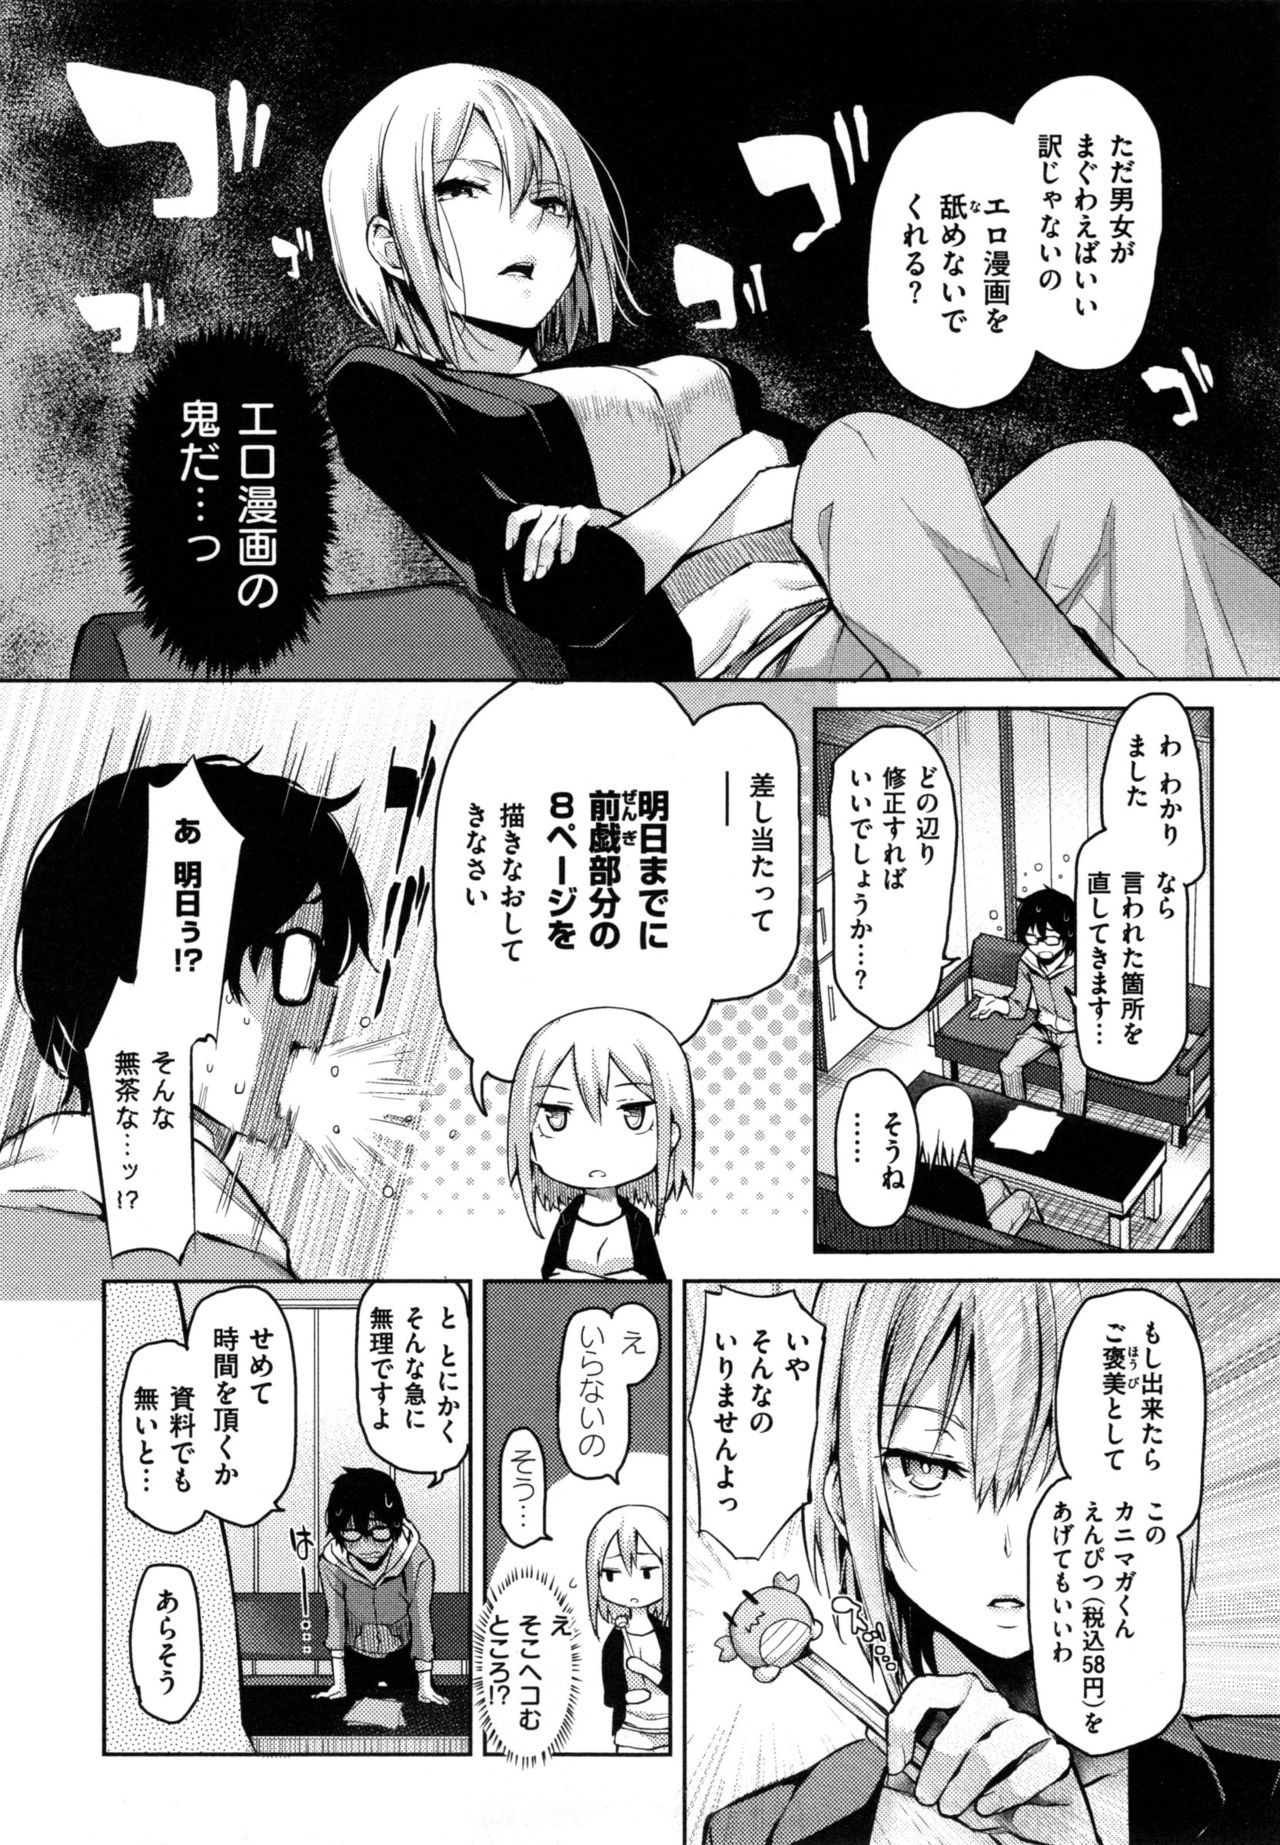 [Michiking] Shujuu Ecstasy - Sexual Relation of Master and Servant.  - page 35 full